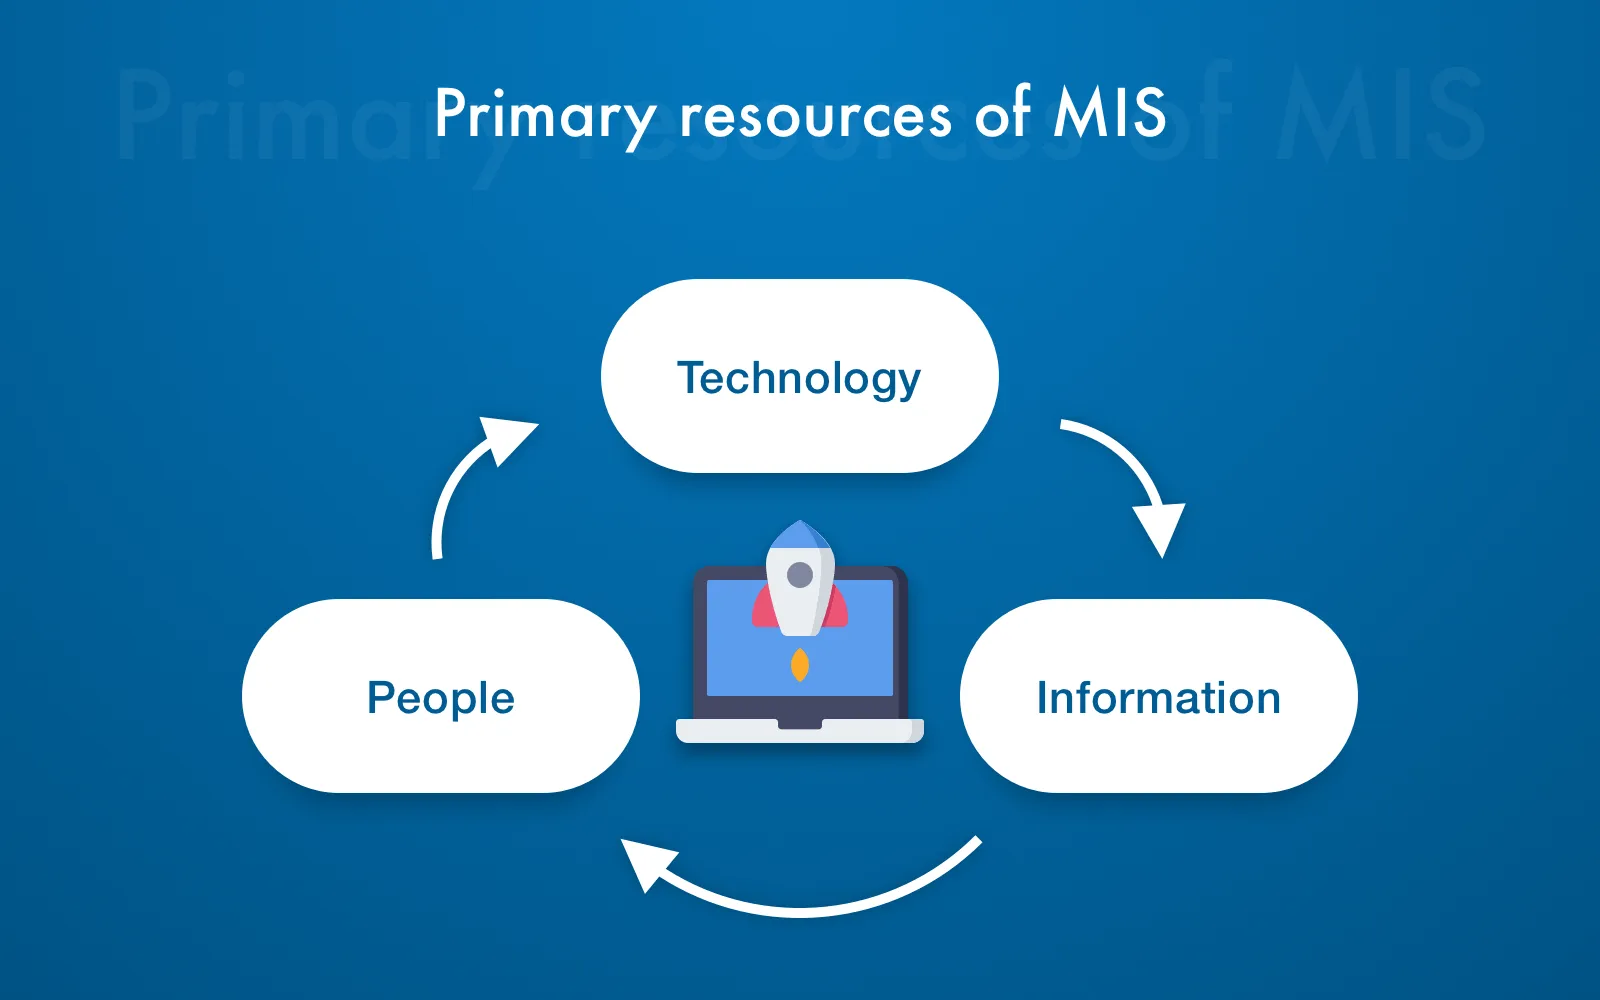 MIS software primary resources concept